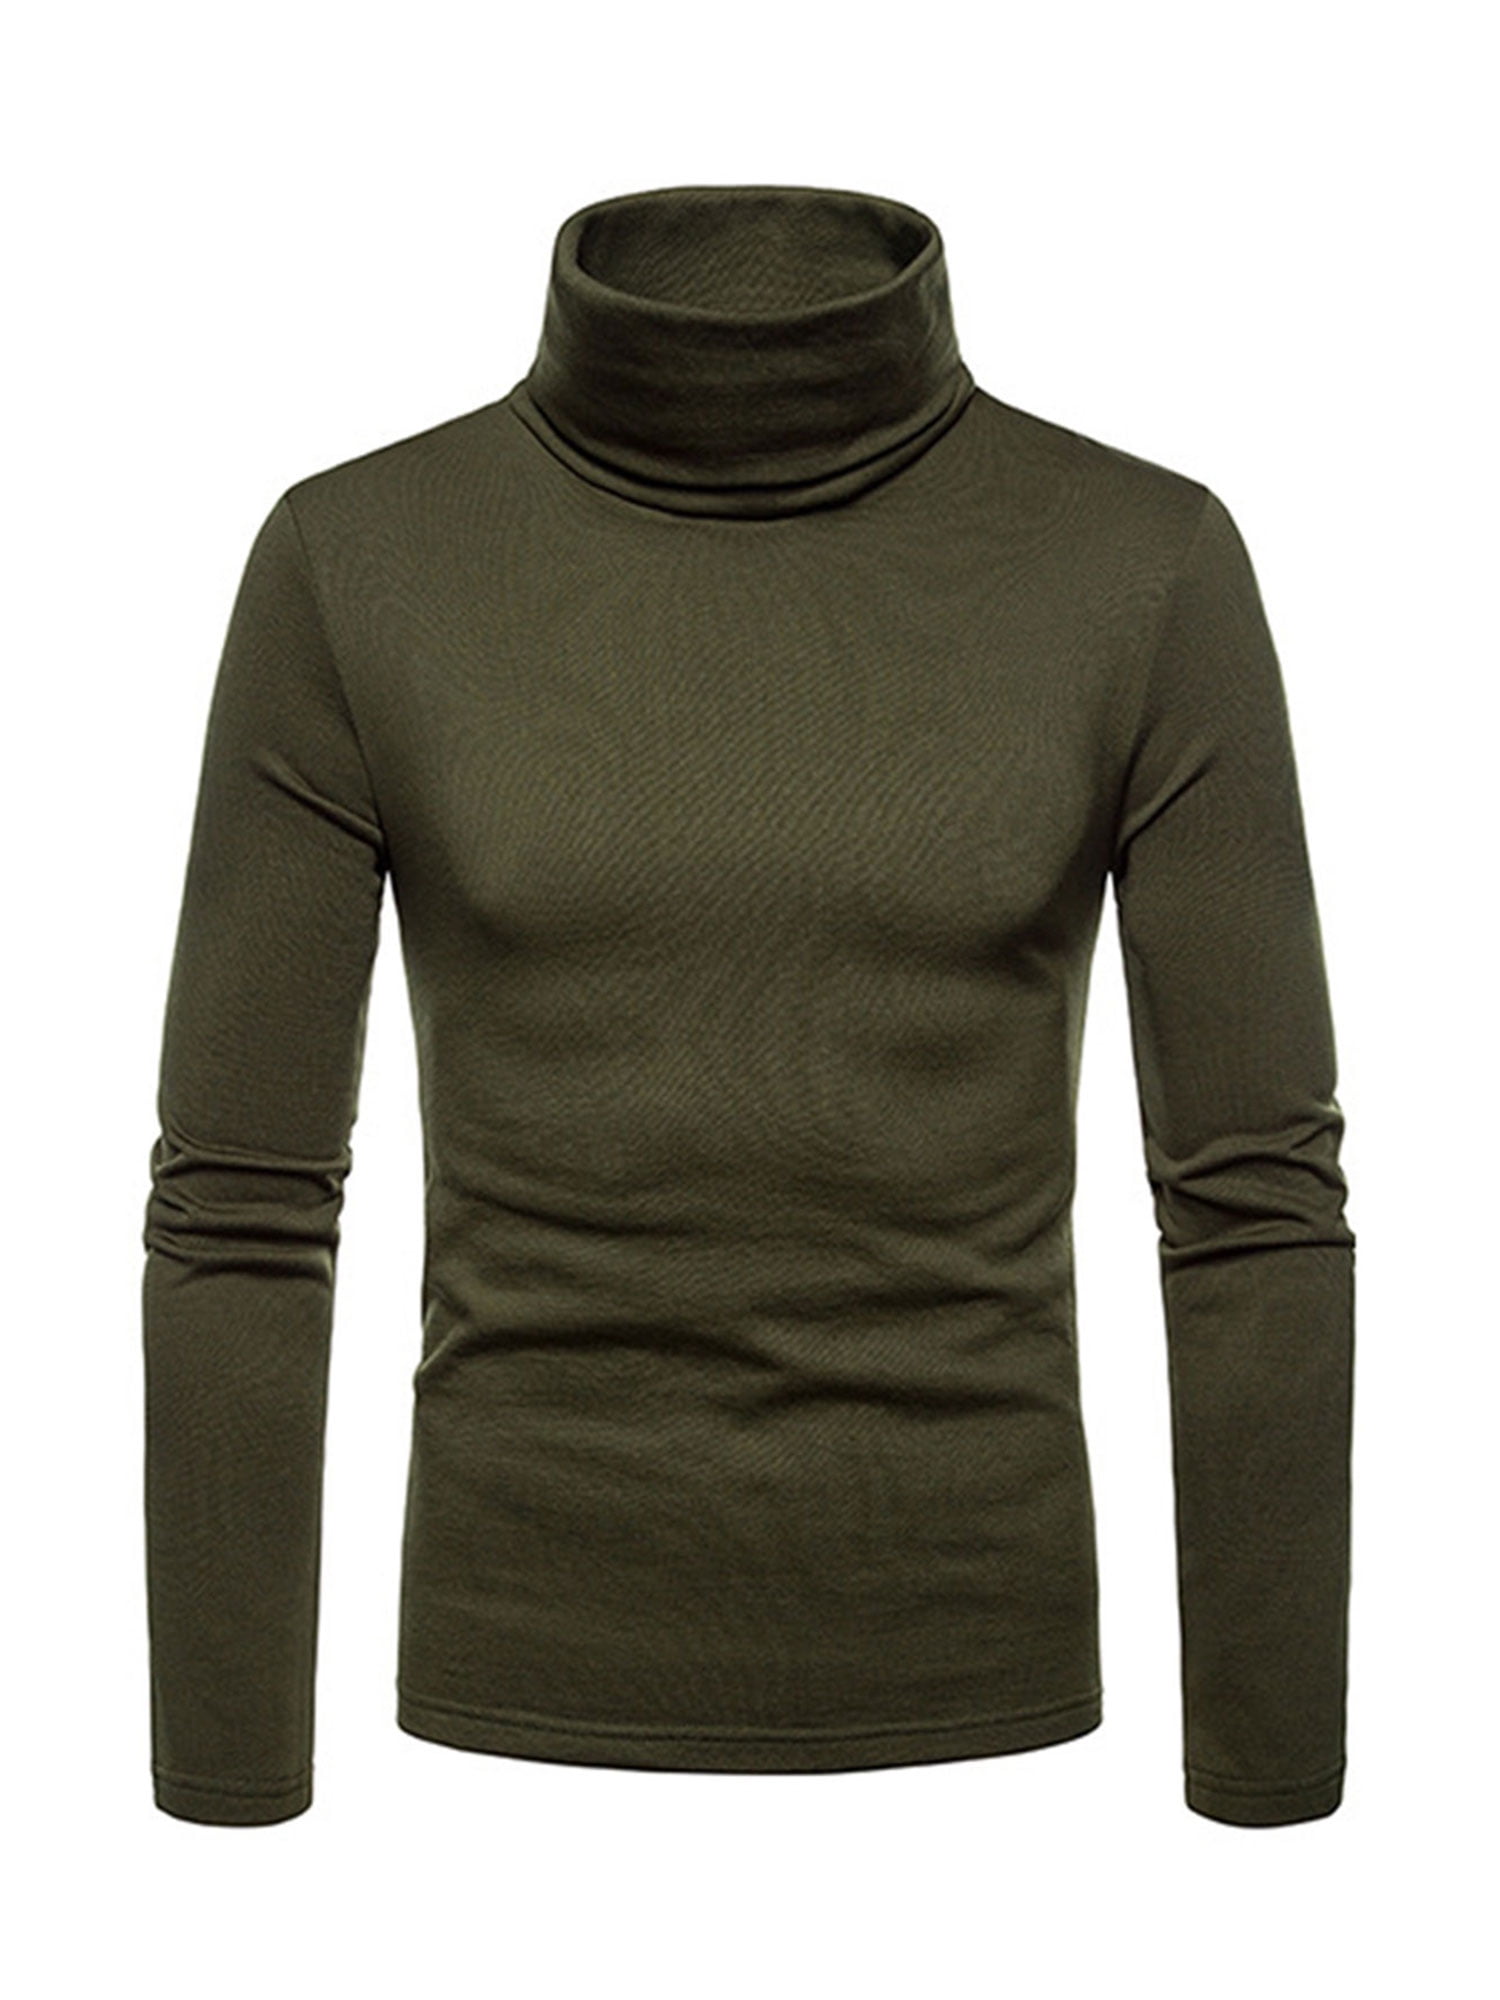 Men's High Turtle Neck Sweater Layer T-shirt Slim Fit Tops Thermal Under Base